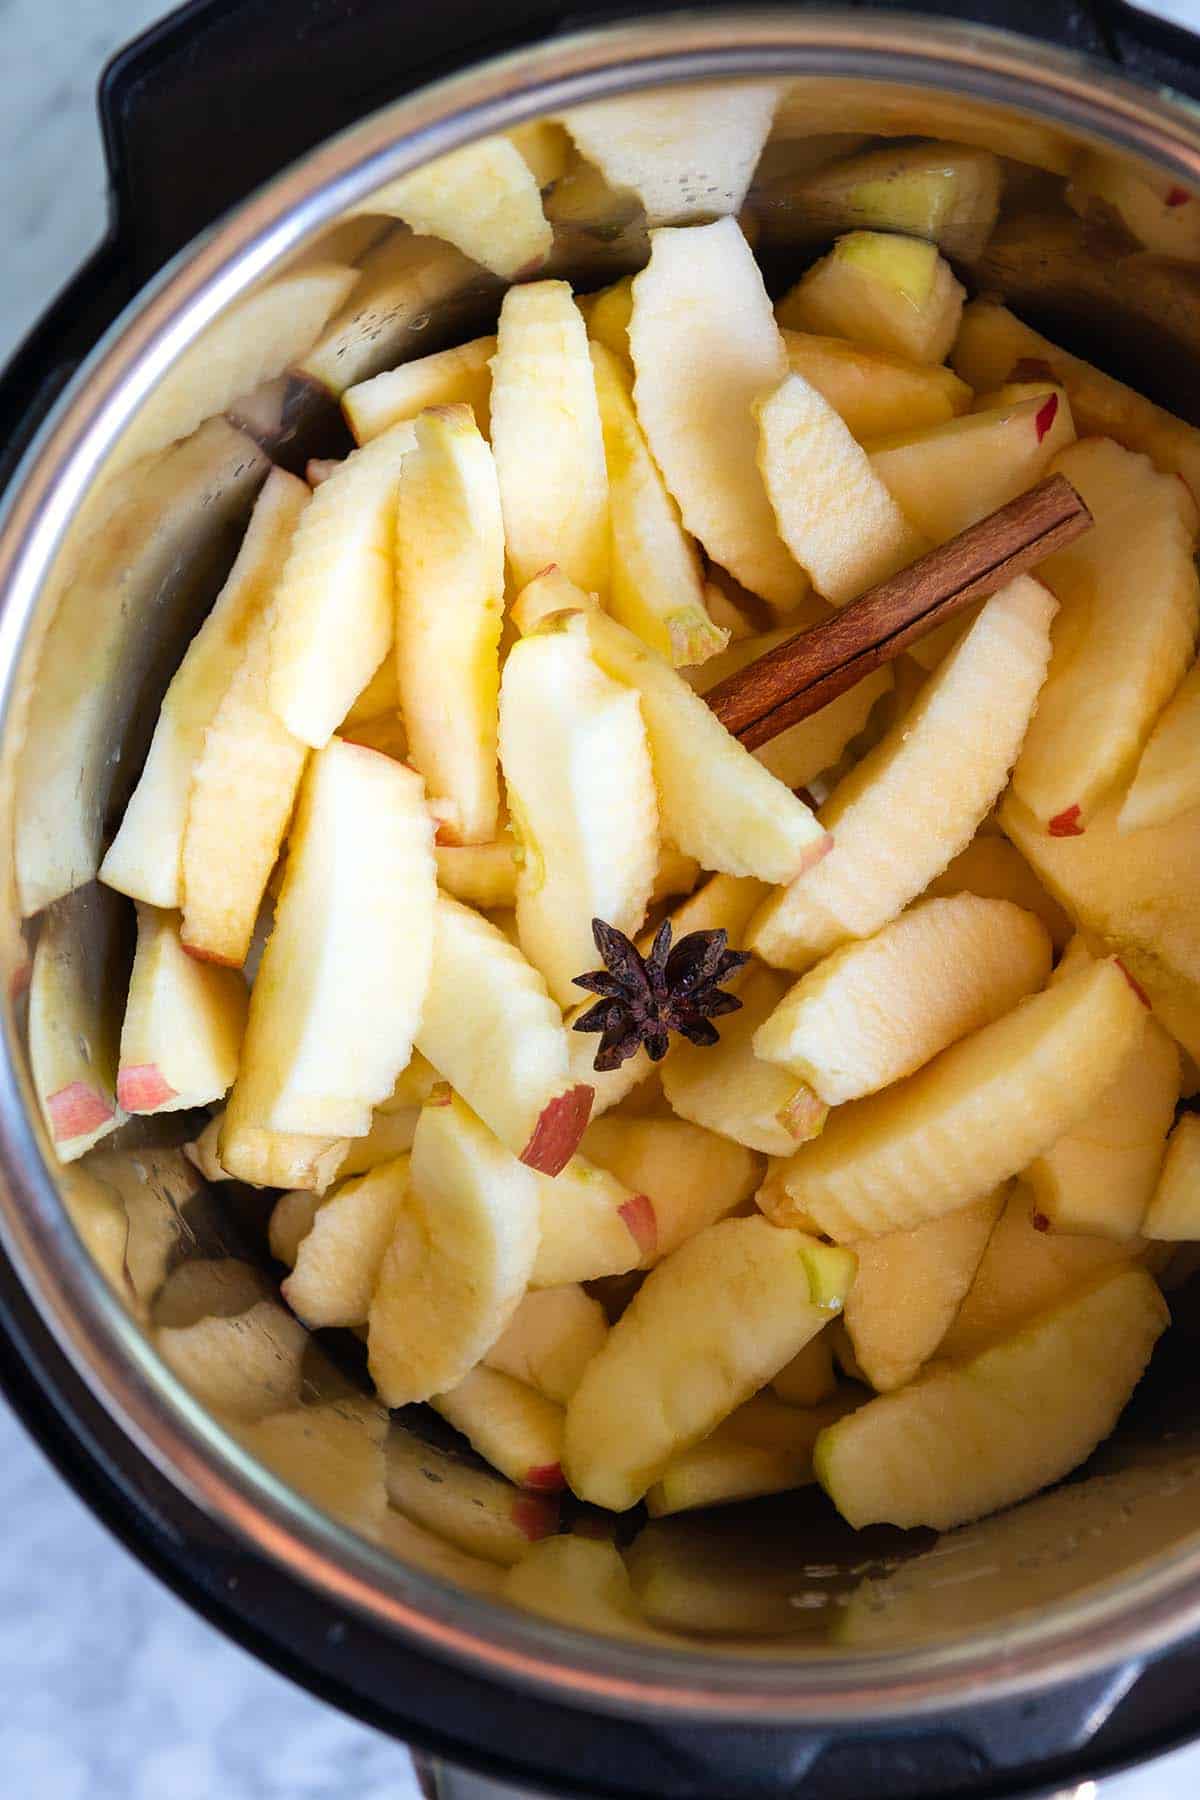 Peeled and chopped apples in an Instant Pot